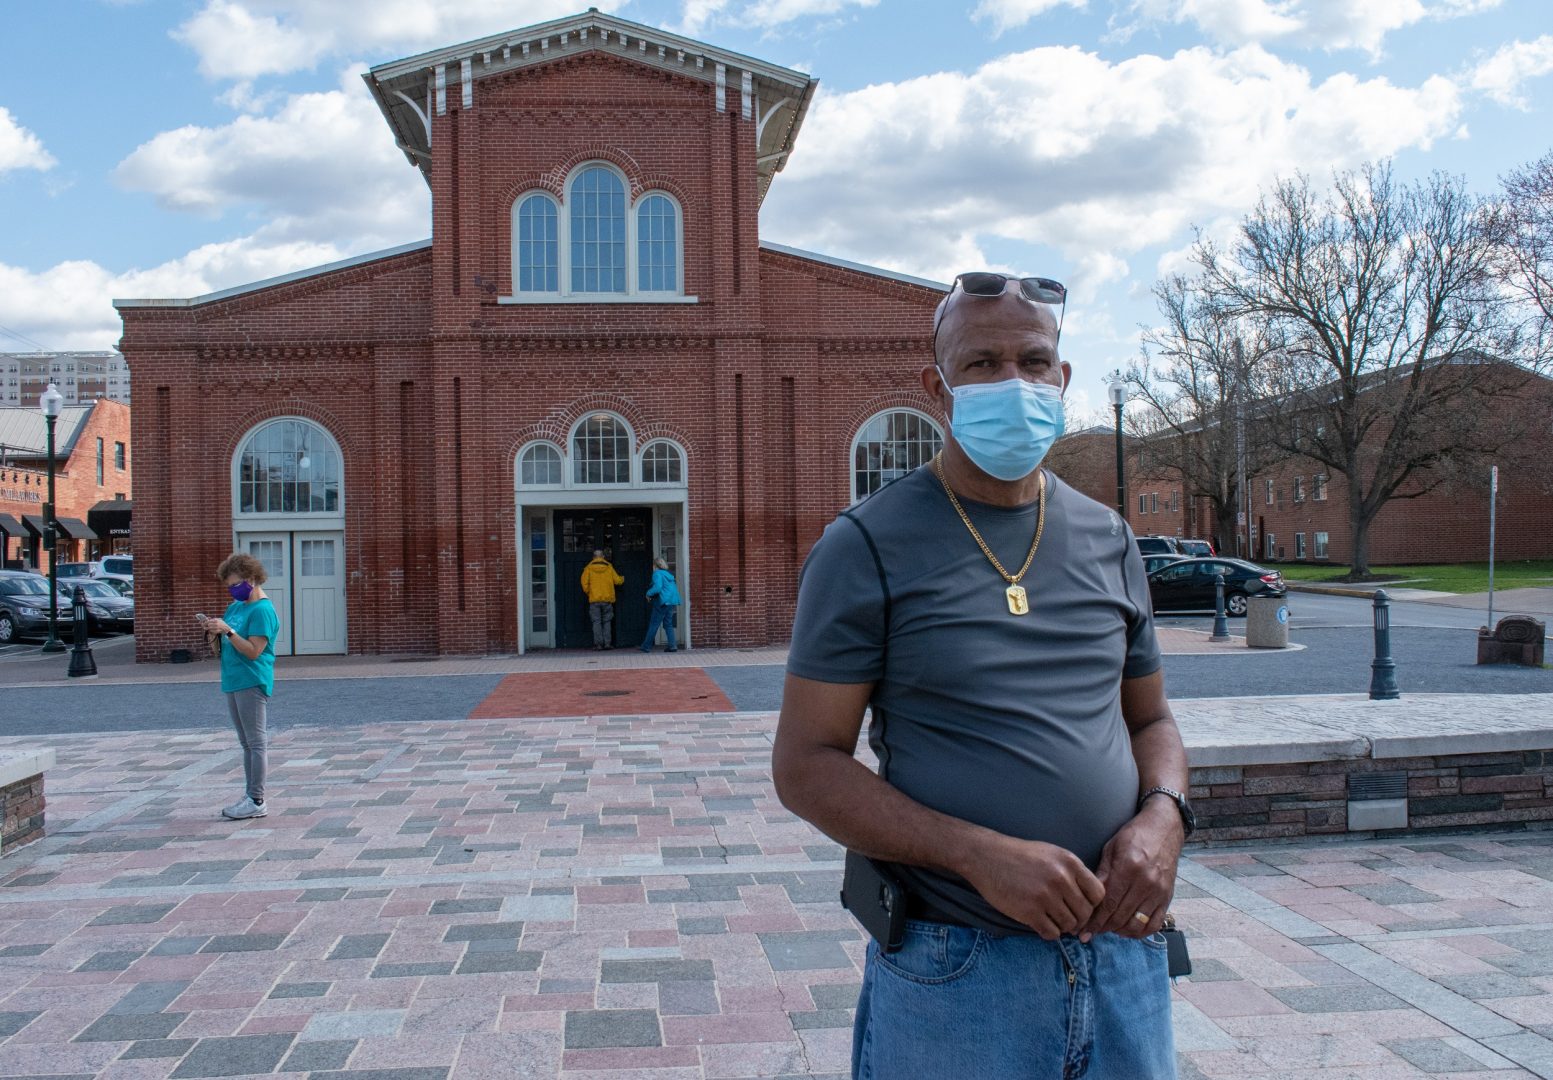 Dil Tulloch stands for a portrait outside Broad Street Market Friday, March 26, 2021. Tulloch had COVID-19 last summer. Though he has been vaccinated, he remains cautious about the risks of the virus.